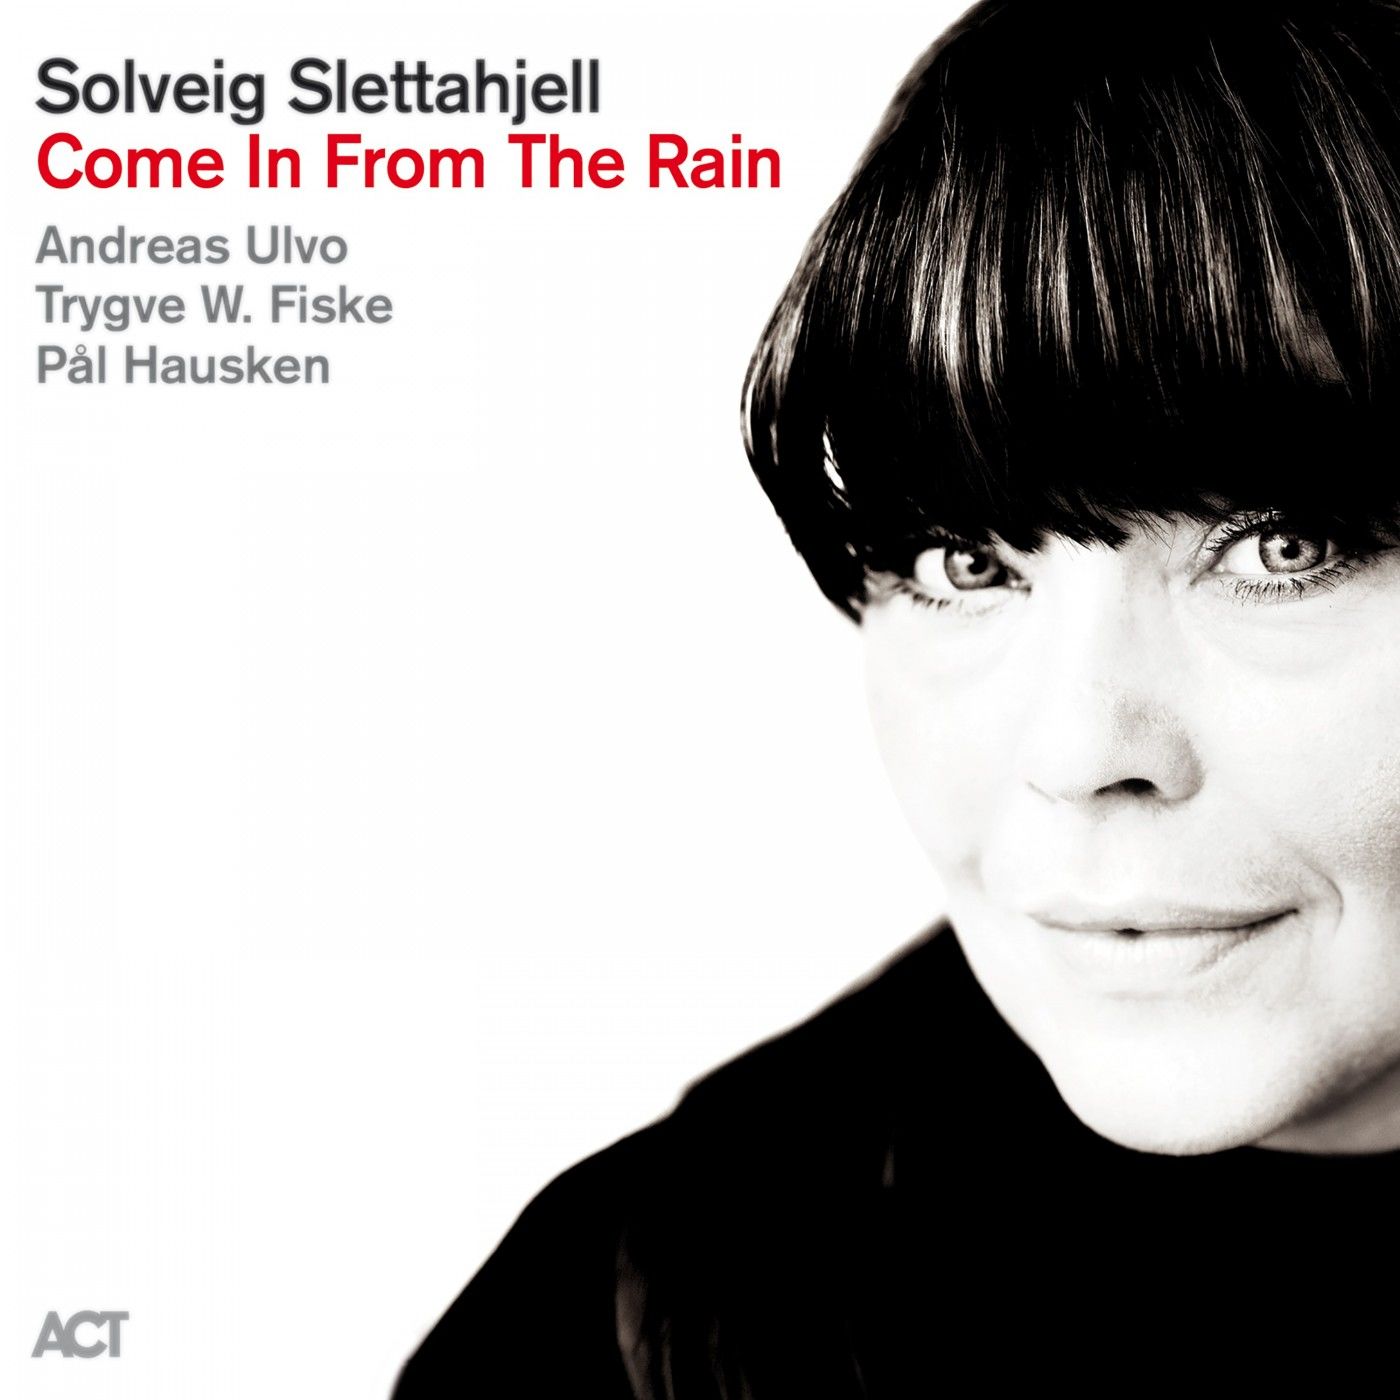 Solveig Slettahjell - Come in from the Rain (2020) [FLAC 24bit/96kHz]